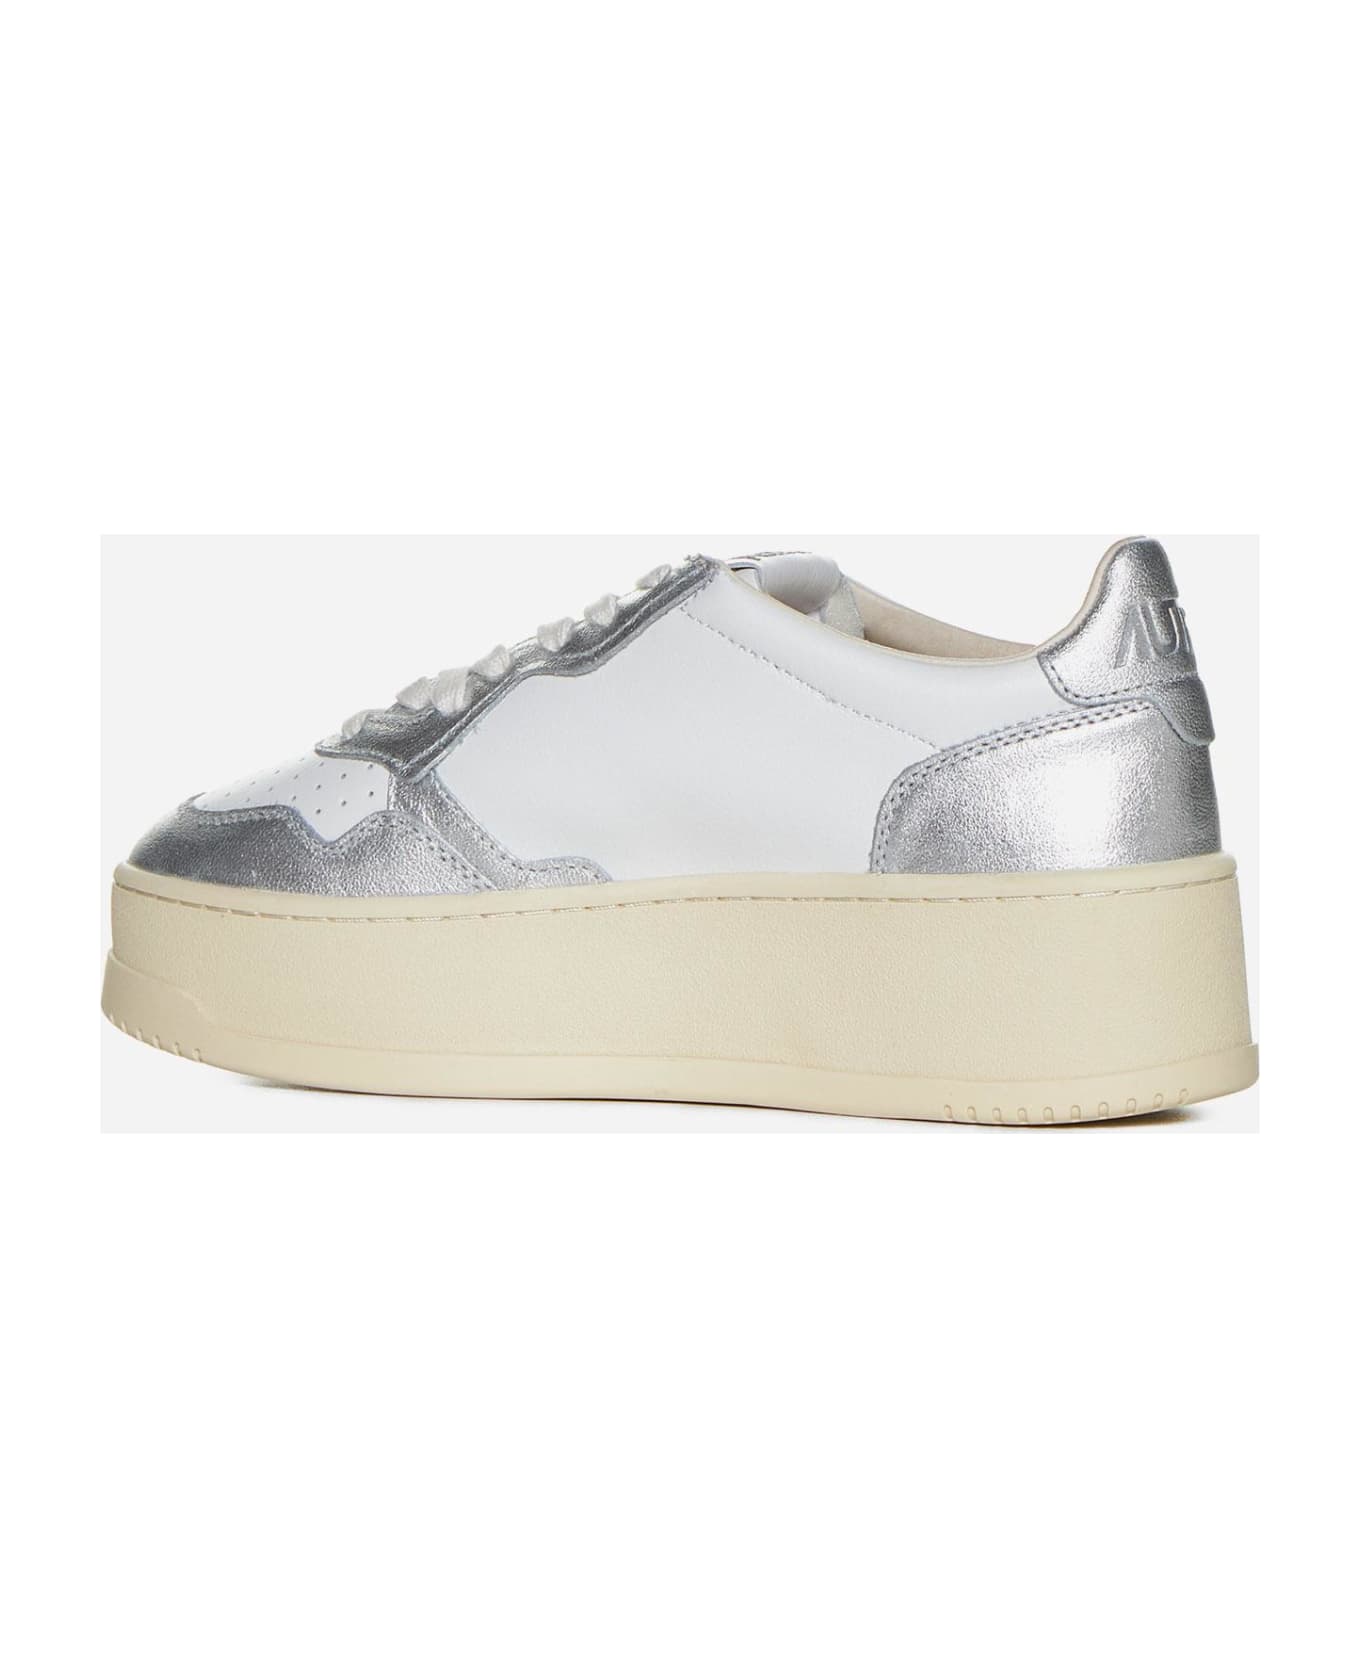 Autry Medalist Platform Leather Sneakers - Silver